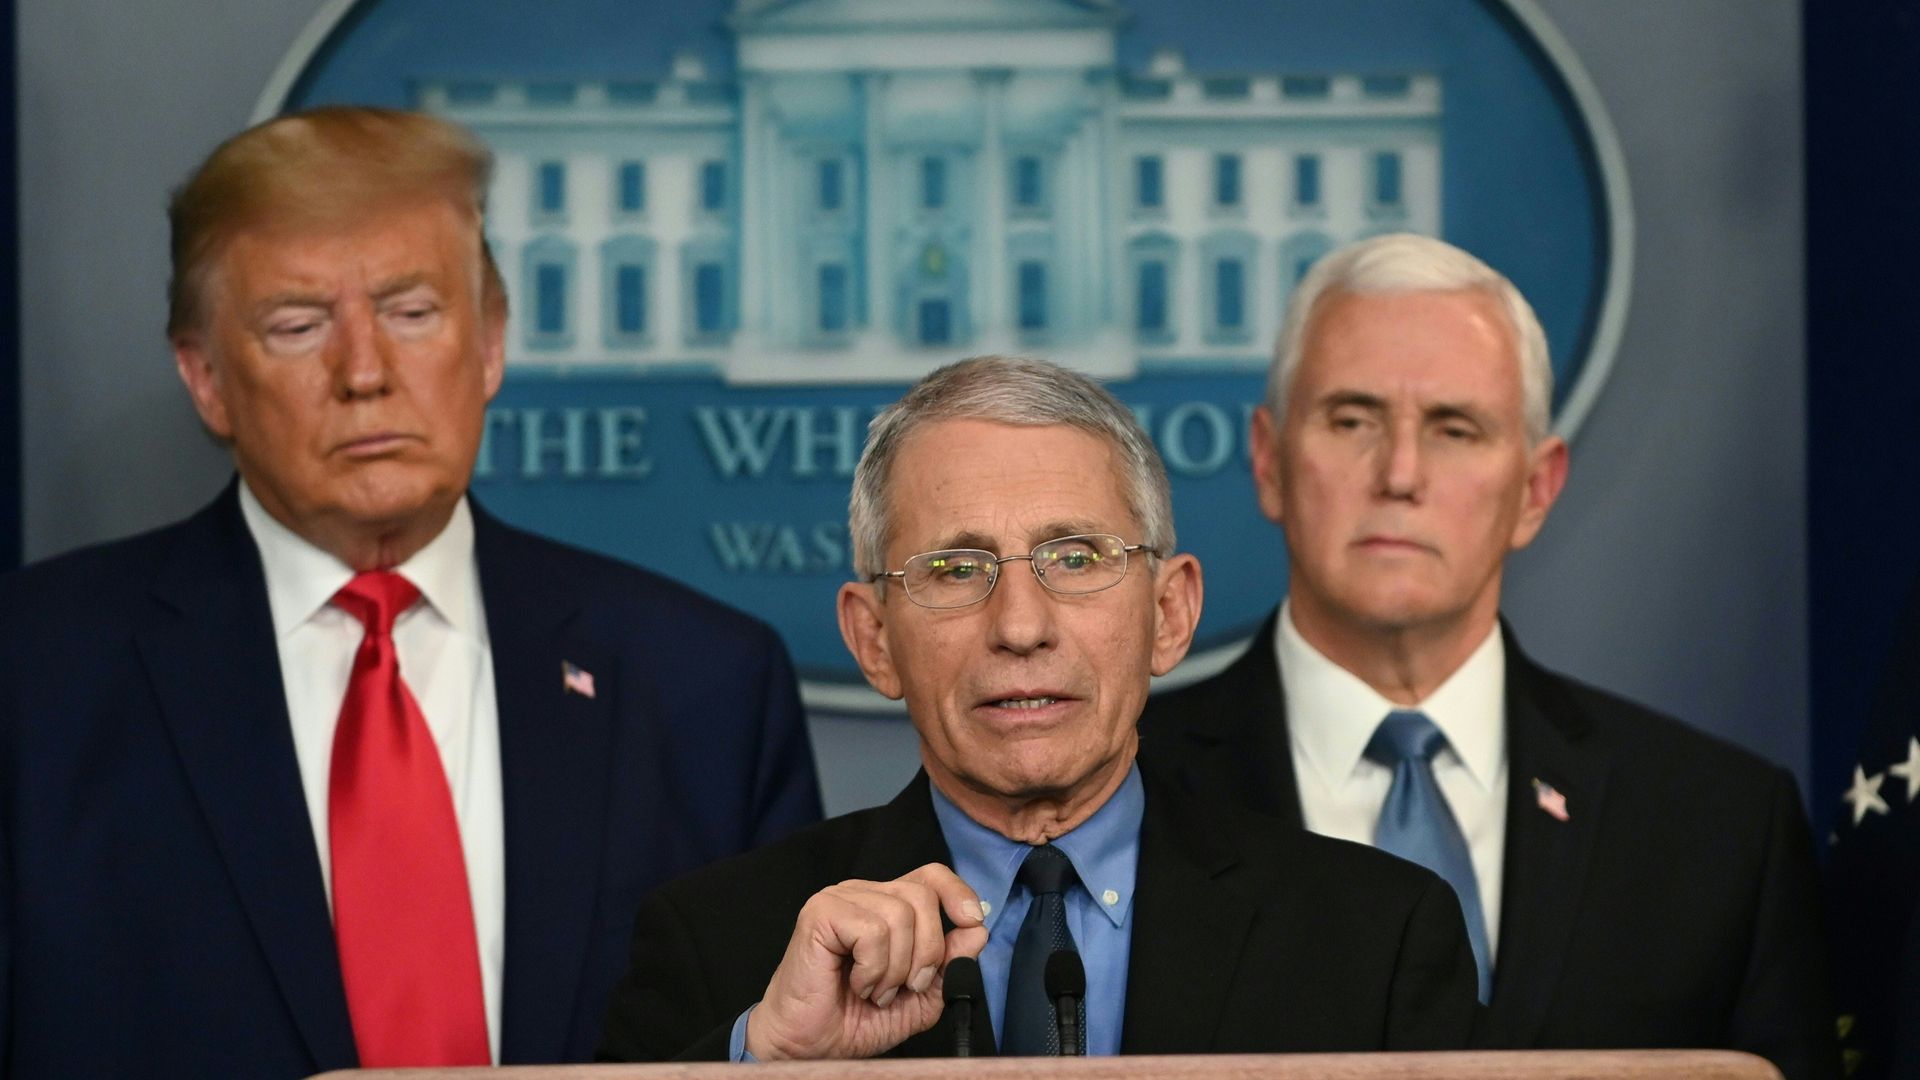 Picture of Anthony Fauci speaking in a press conference in front of Donald Trump and Mike Pence